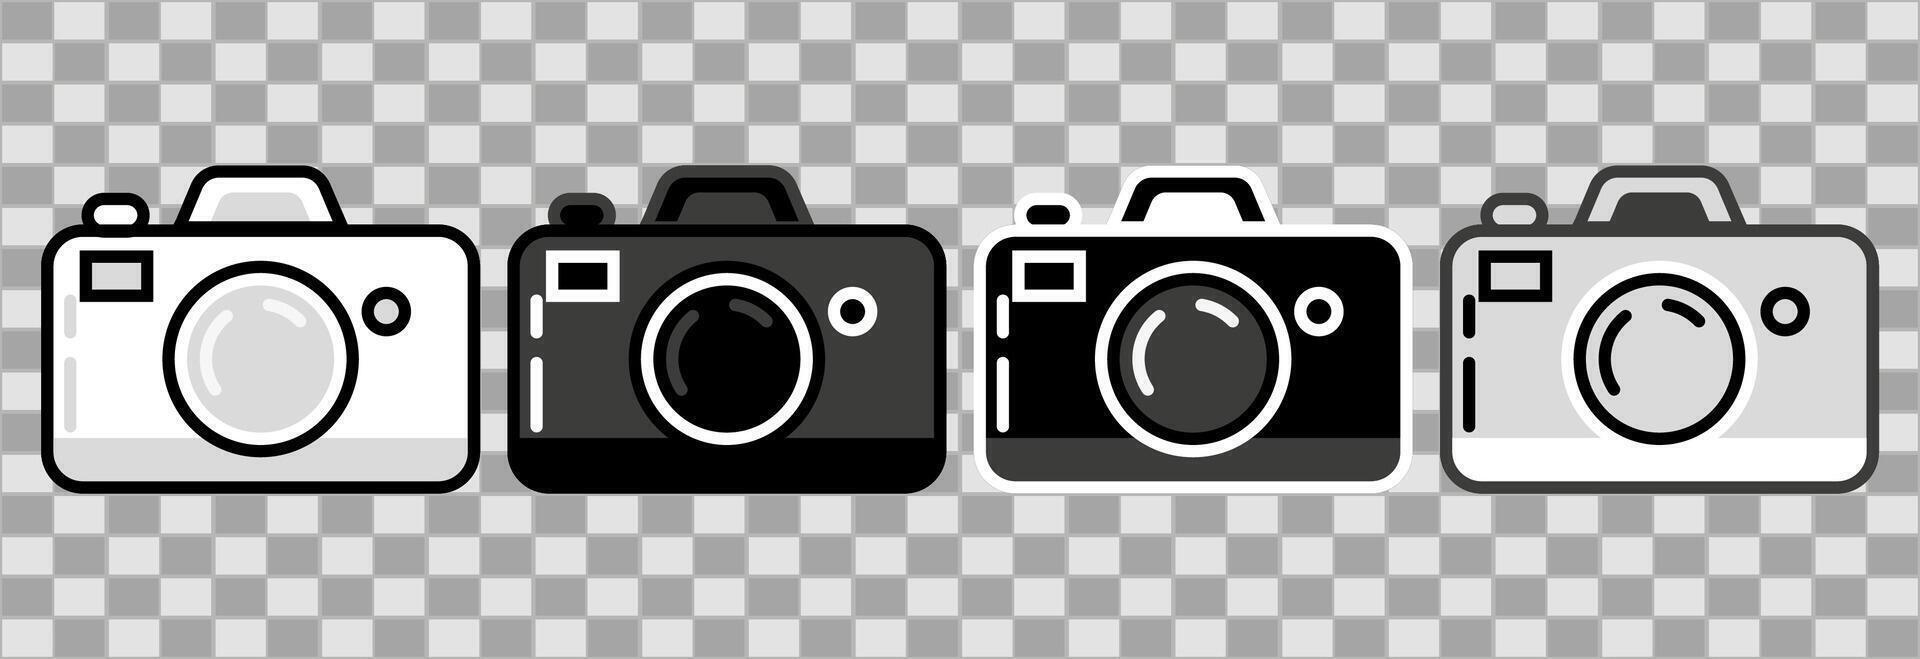 Camera icons or logo sign symbol vector illustration - Collection of high quality simply black style vector icons